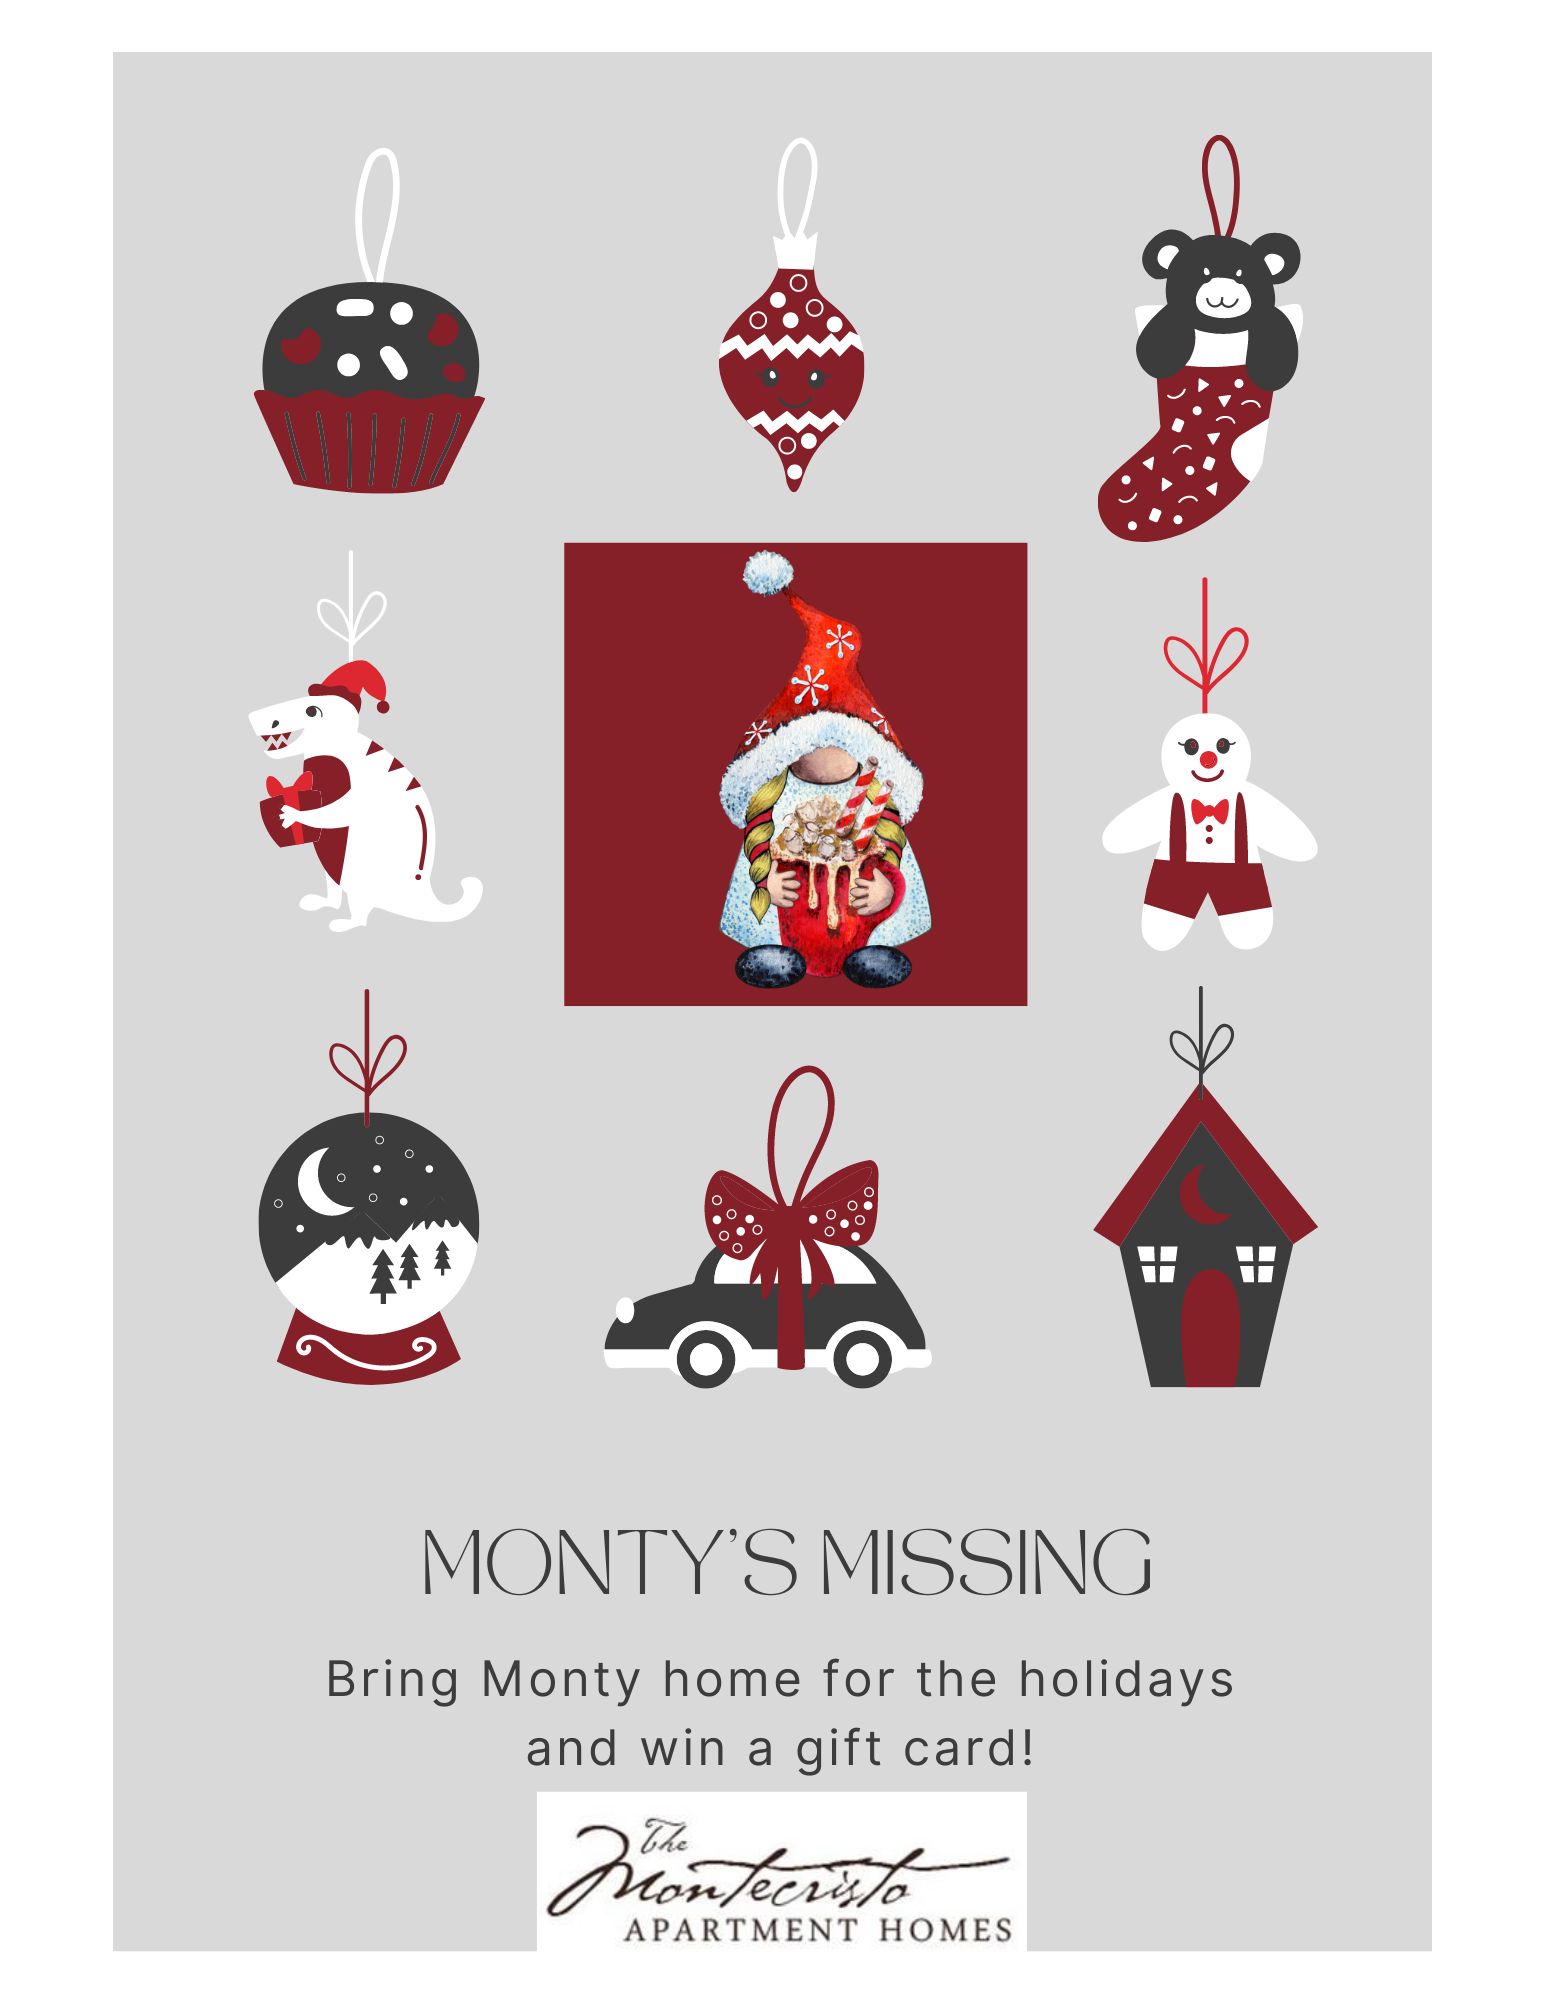 Monty's missing - bring him home to the Montecristo Apartments in Stone Oak for the holidays.